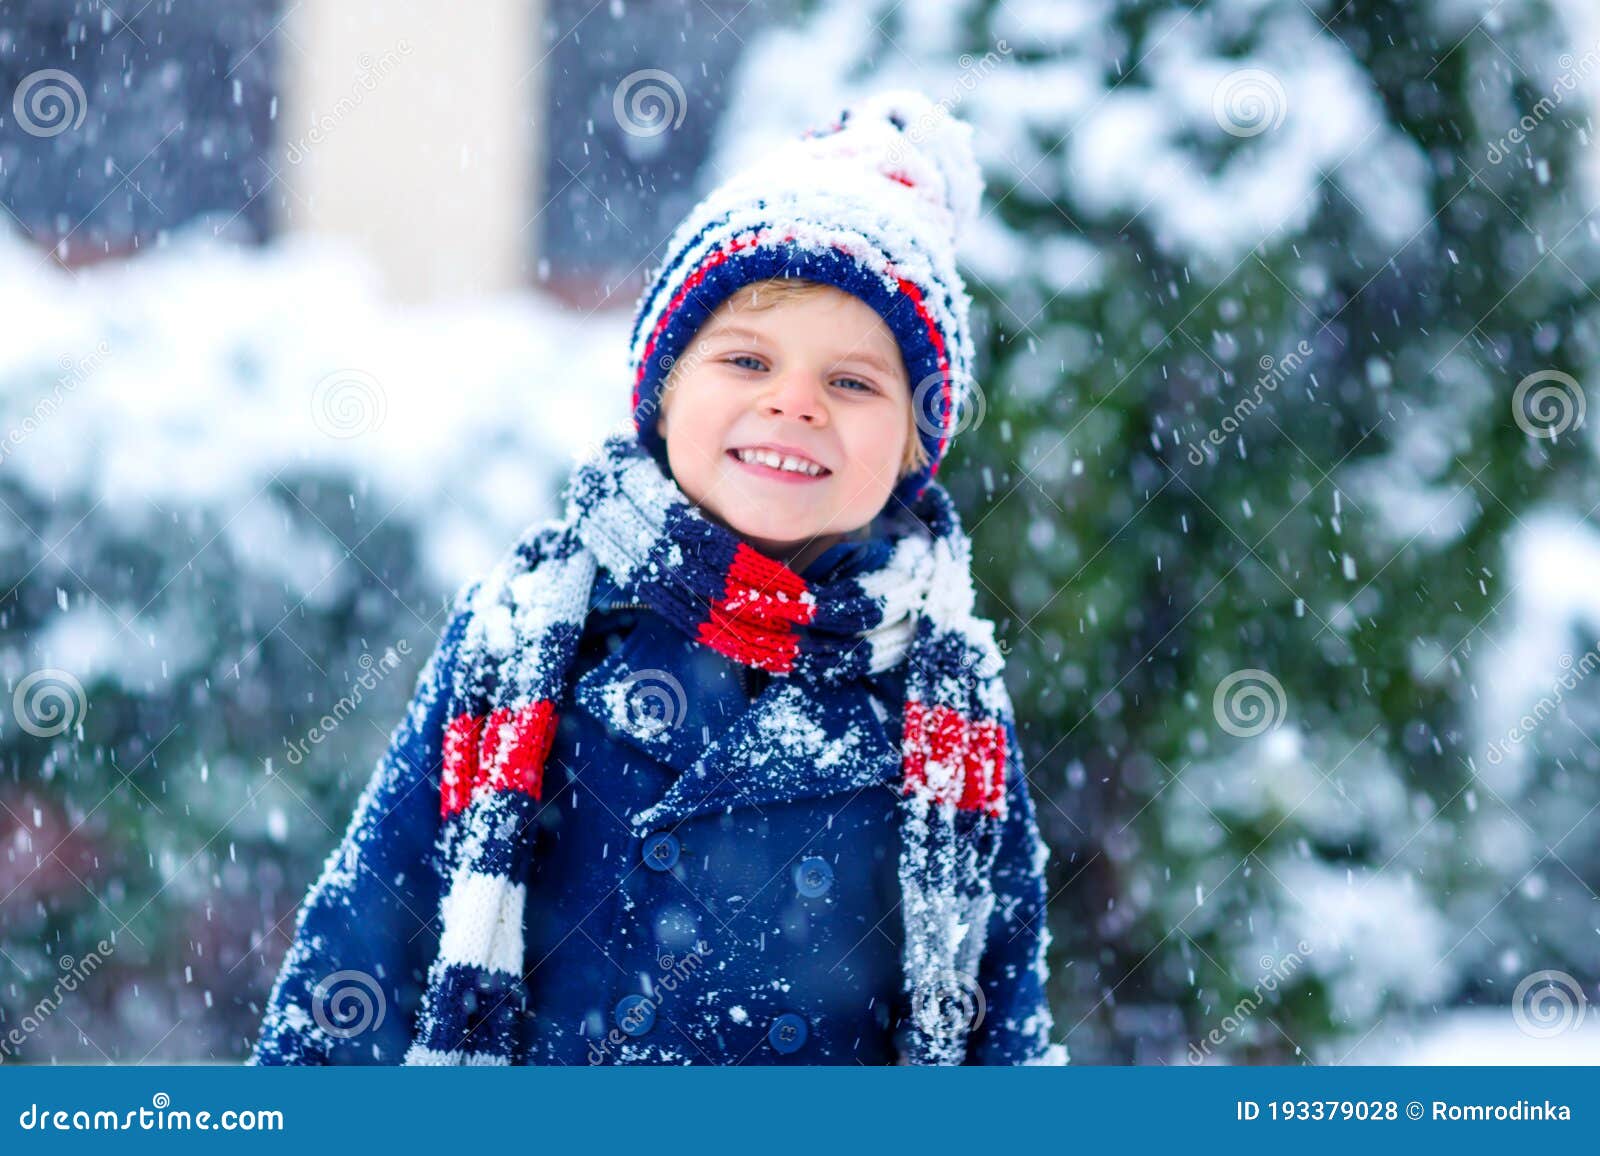 Cute Little Funny Child in Colorful Winter Fashion Clothes Having